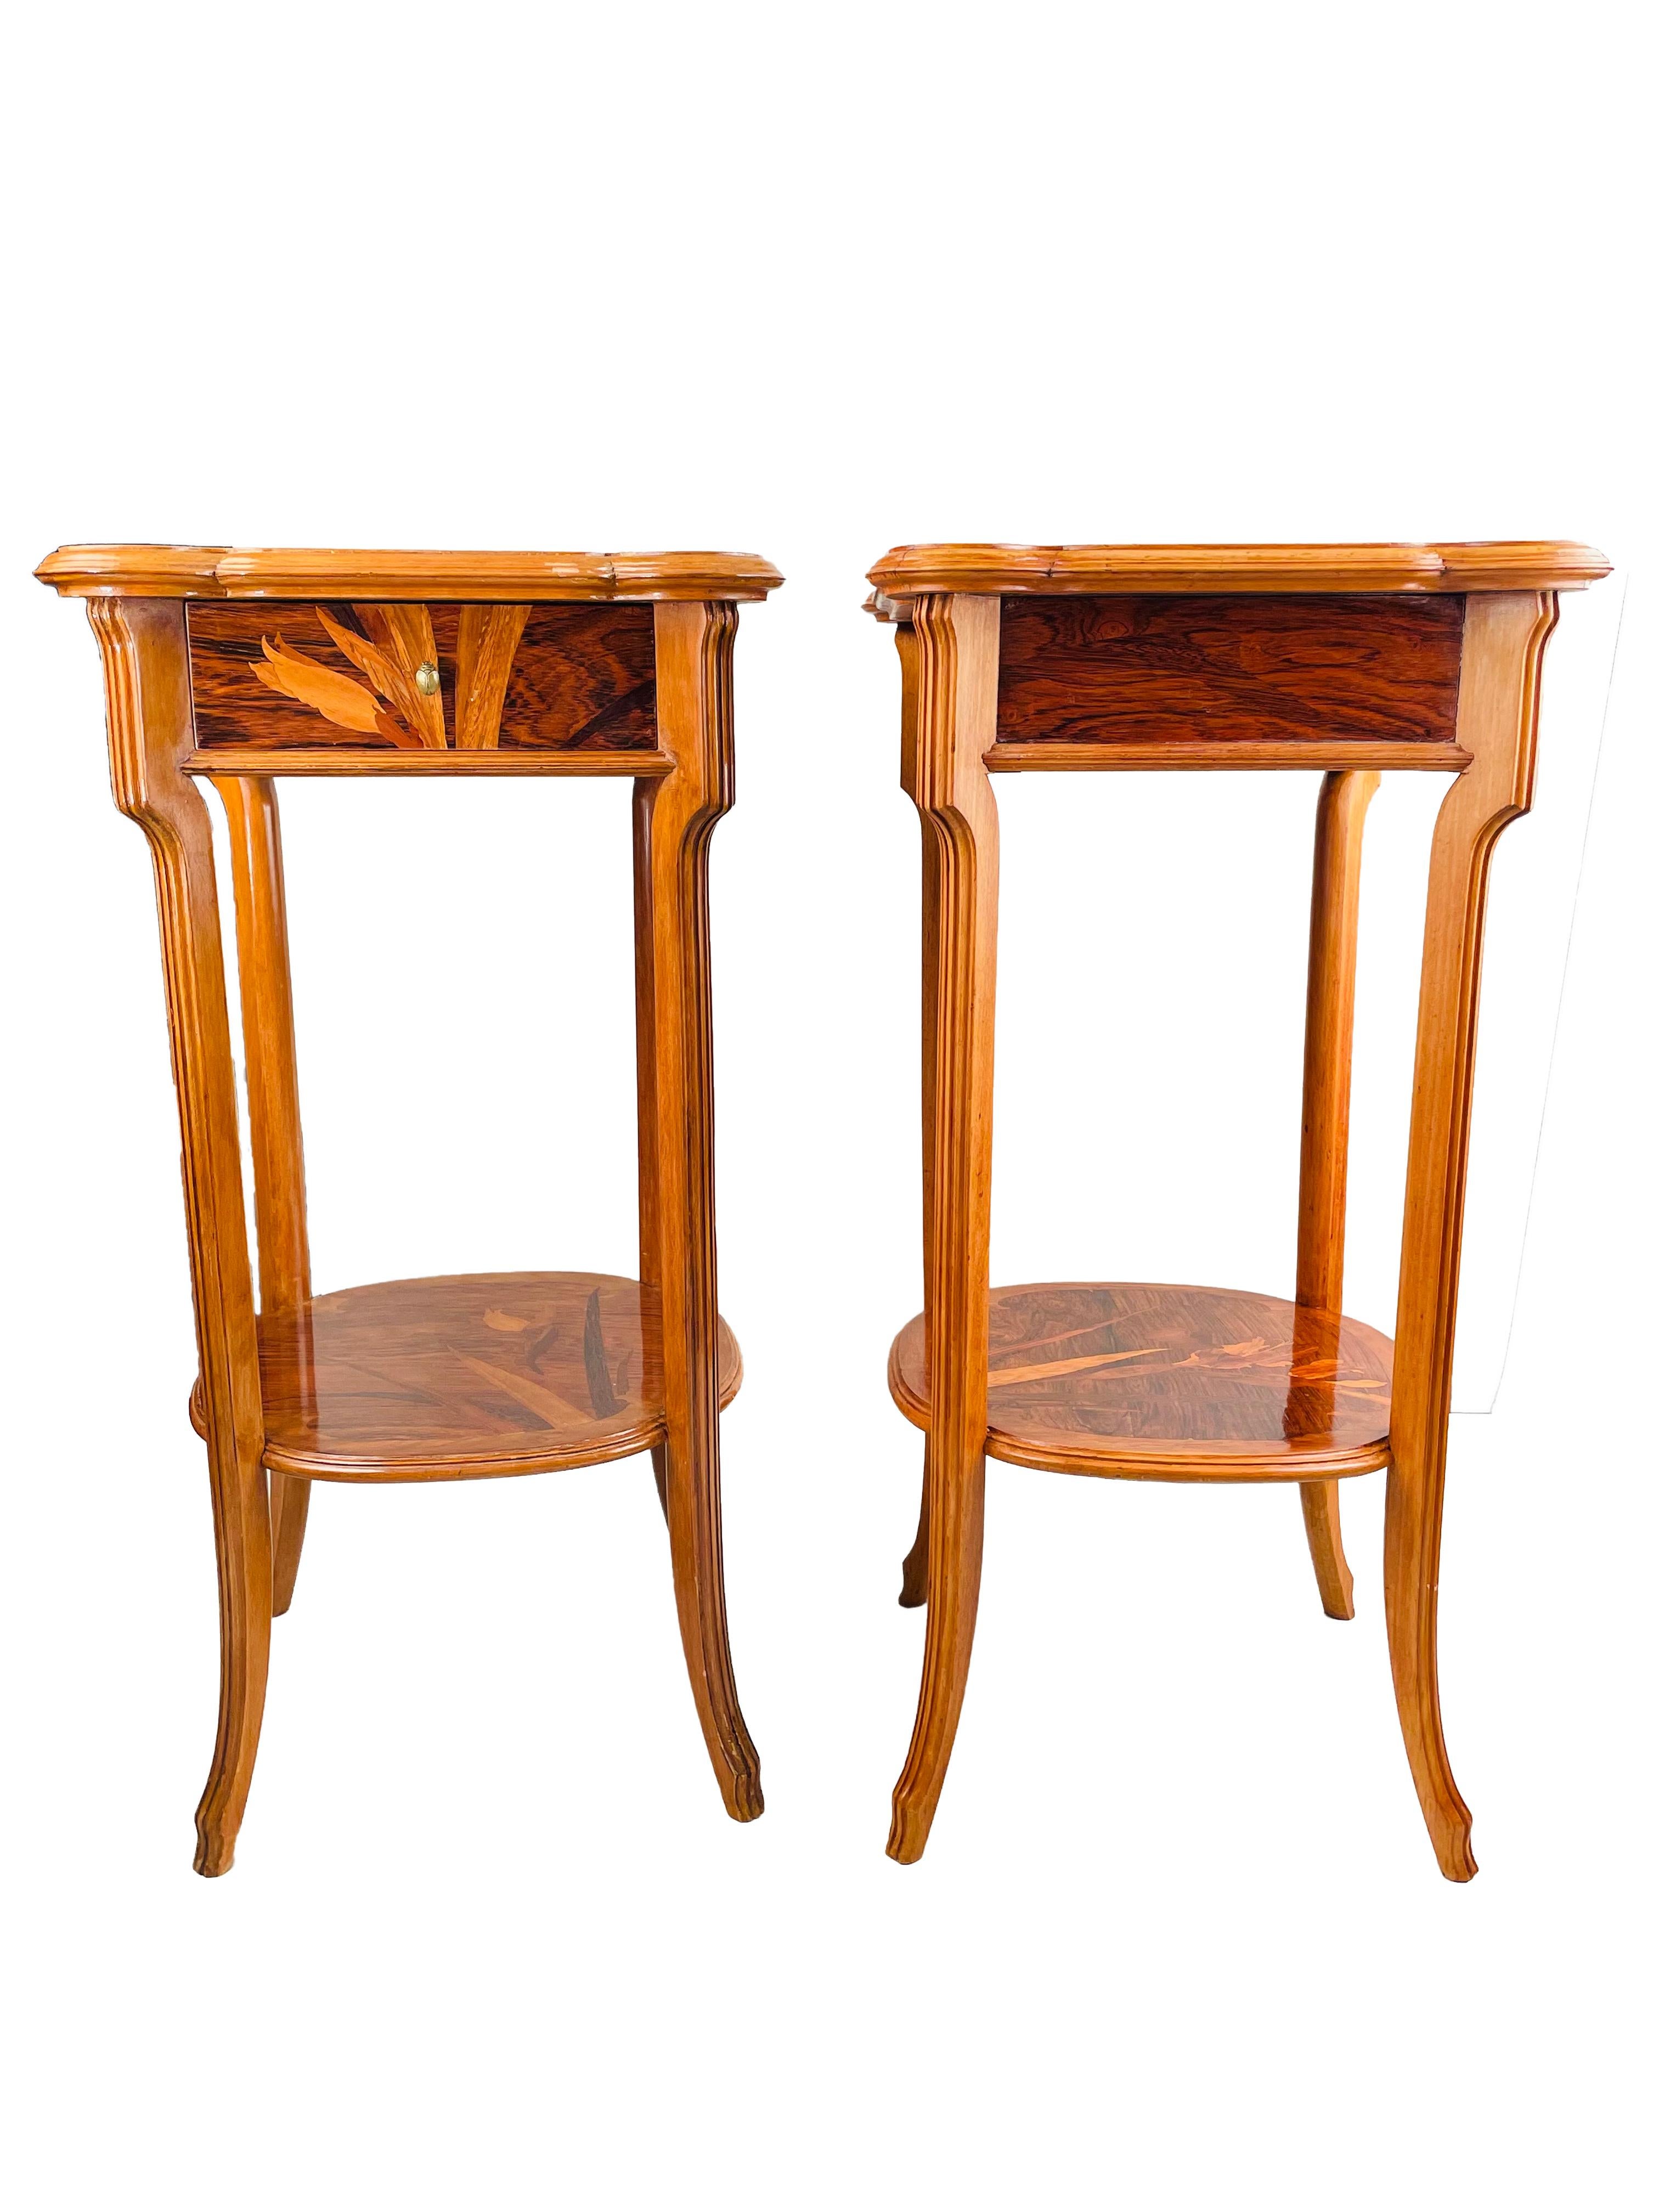 Early 20th Century Pair of French Art Nouveau Occasional Tables by, Emile Gallé 2